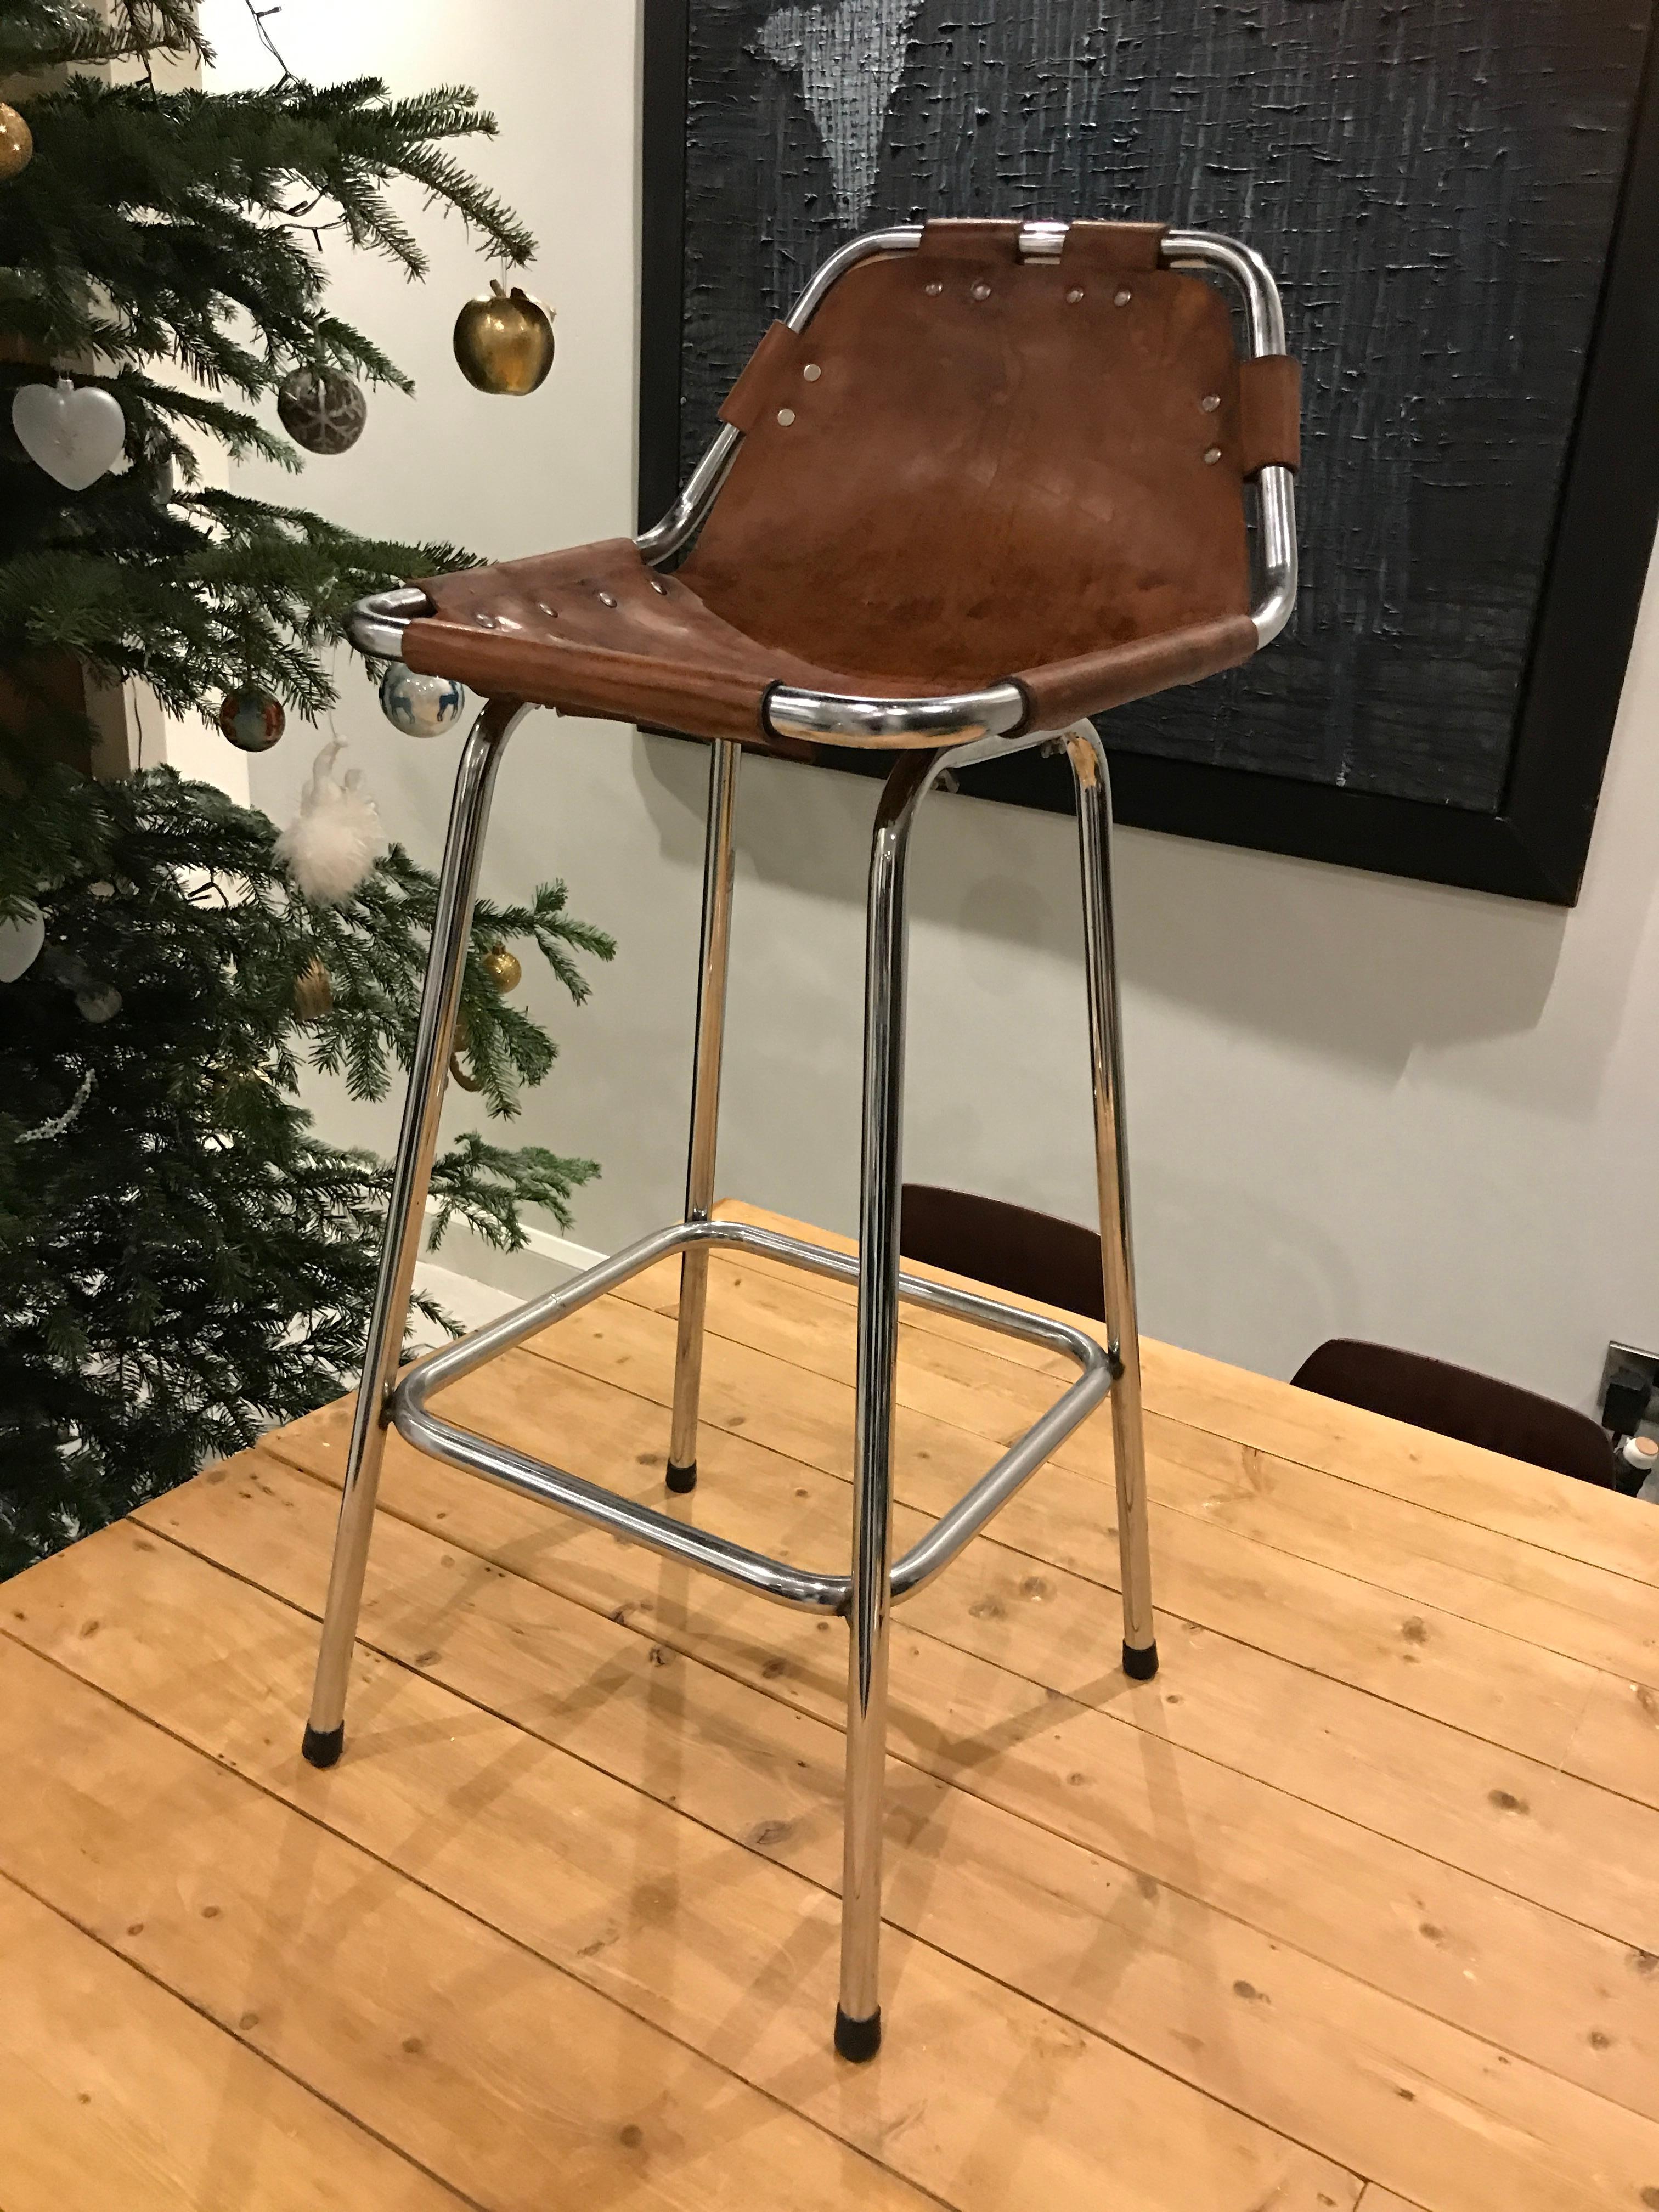 Stunning stool, designer Charlotte Perriand used these in the Ski Resort Les Arcs, circa 1960. These stools were commissioned to be made by Cassina, one of the best Italian furniture maker’s, very nice chrome tubular frame with thick leather seat,